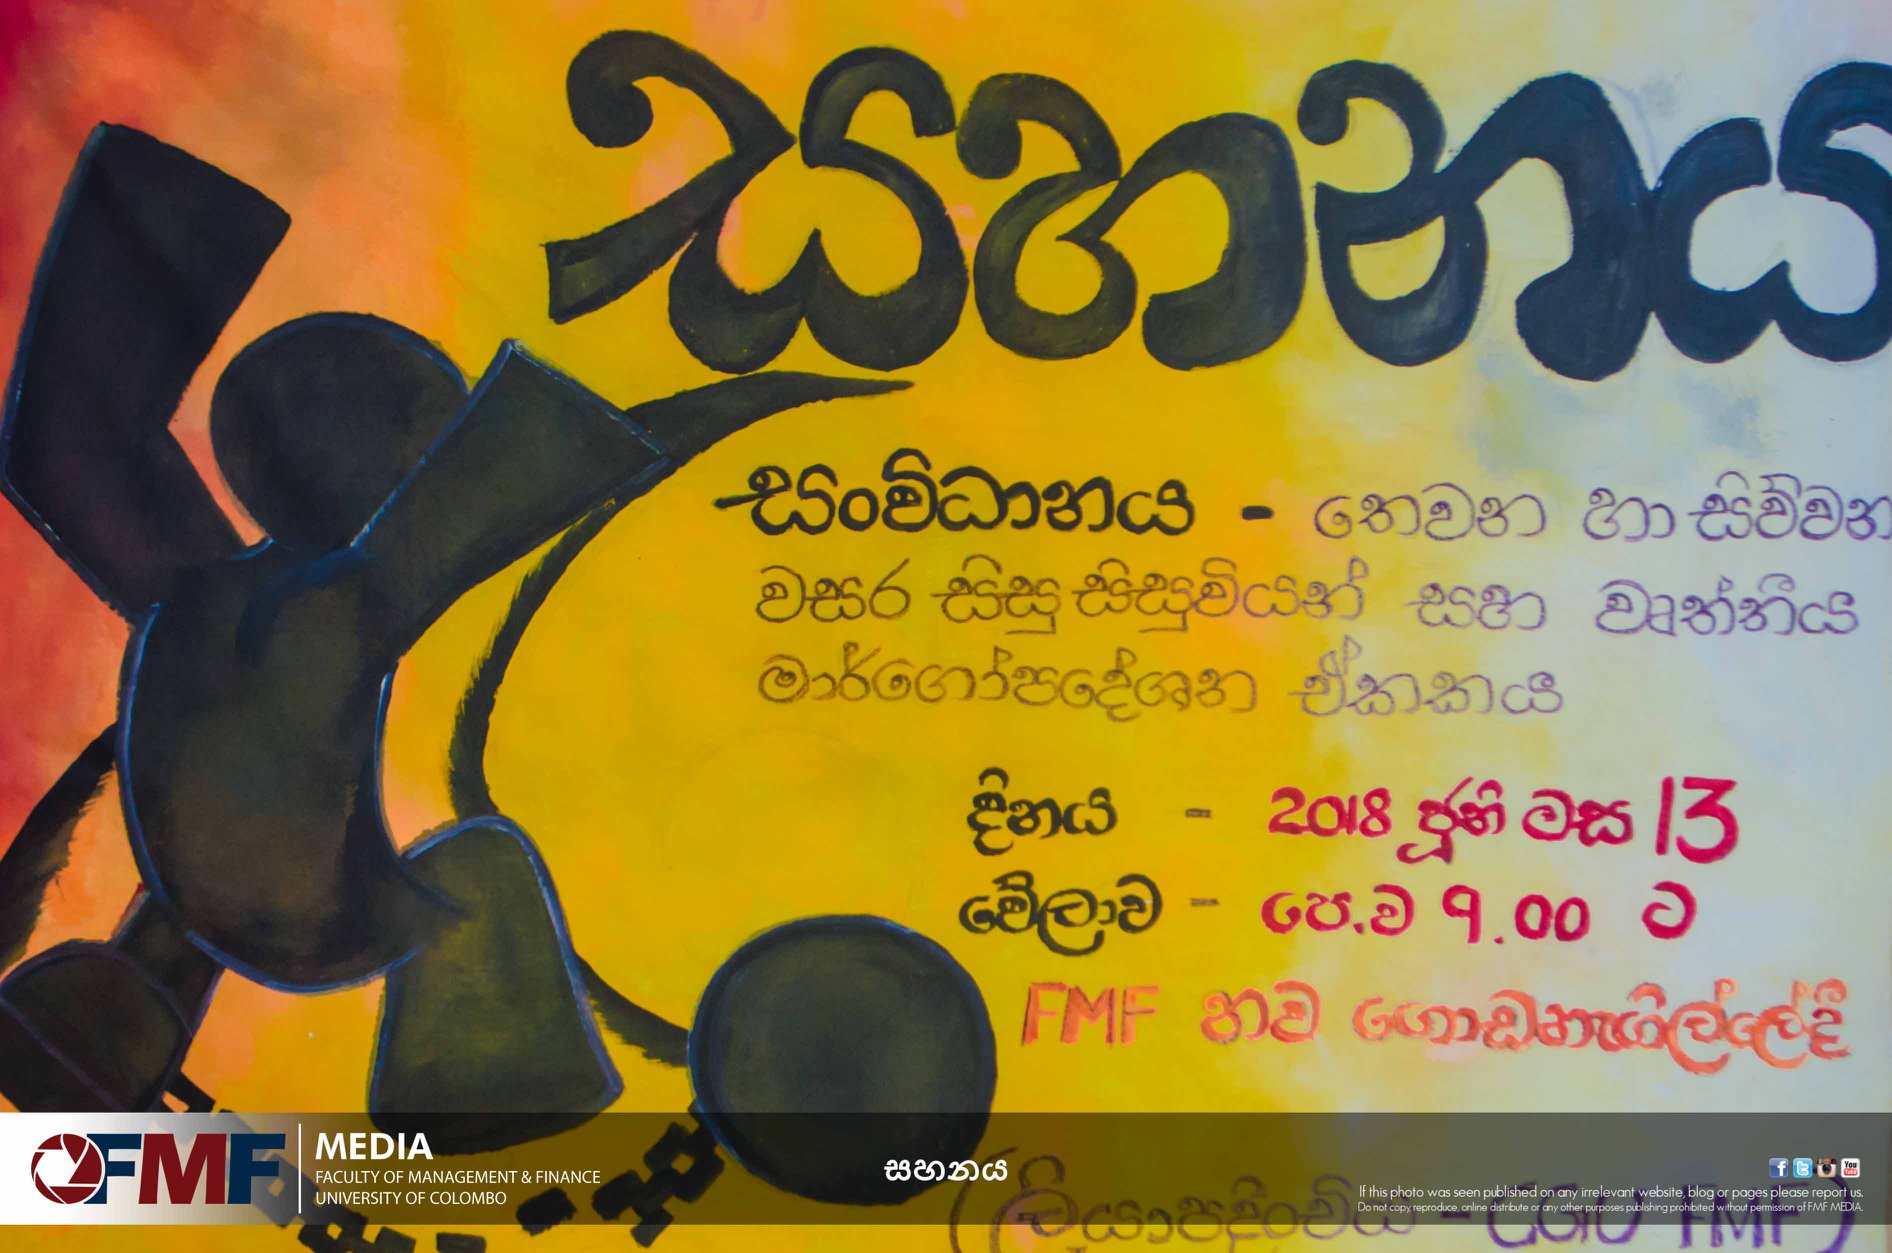 A Glimpse of Awareness Programme on Stress Relief and Need for Counseling ( සහනය).